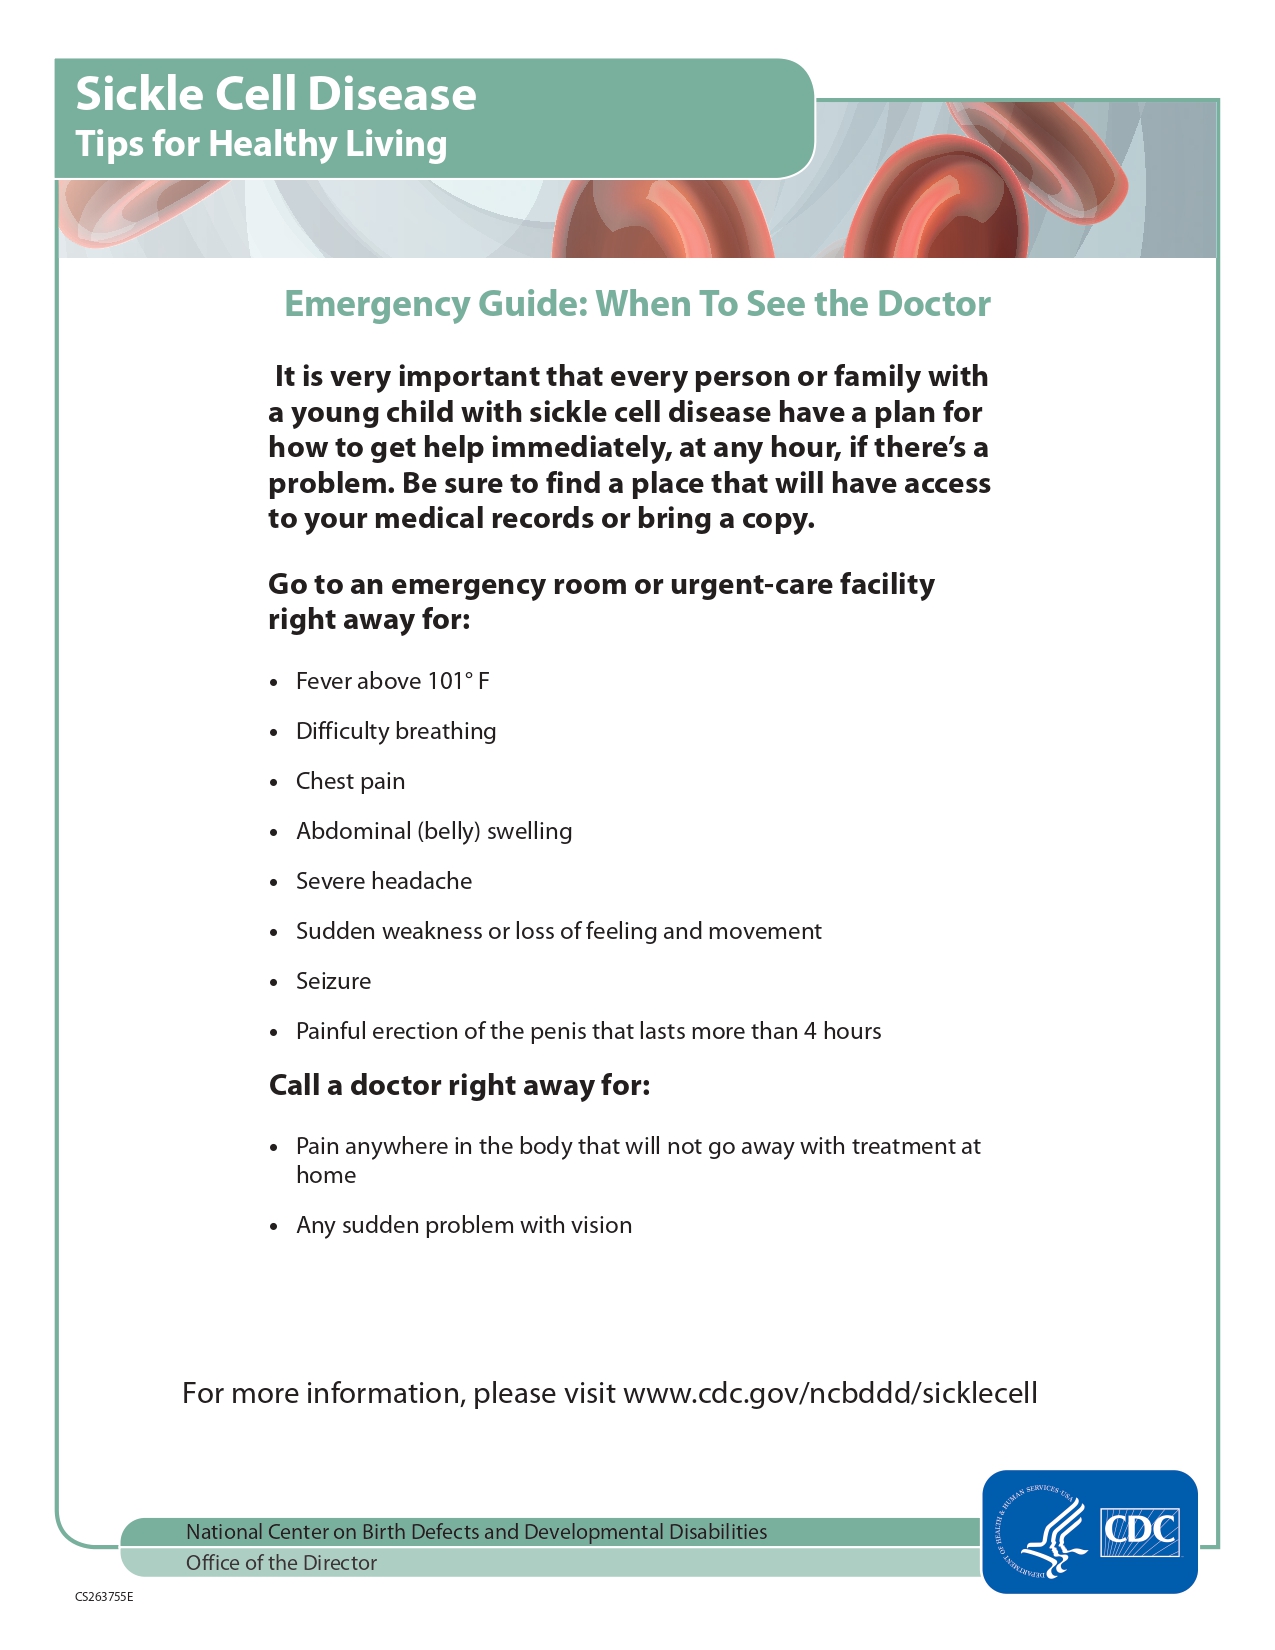 Sickle Cell Disease Tips For Healthy Living Emergency Guide: When To See The Doctor